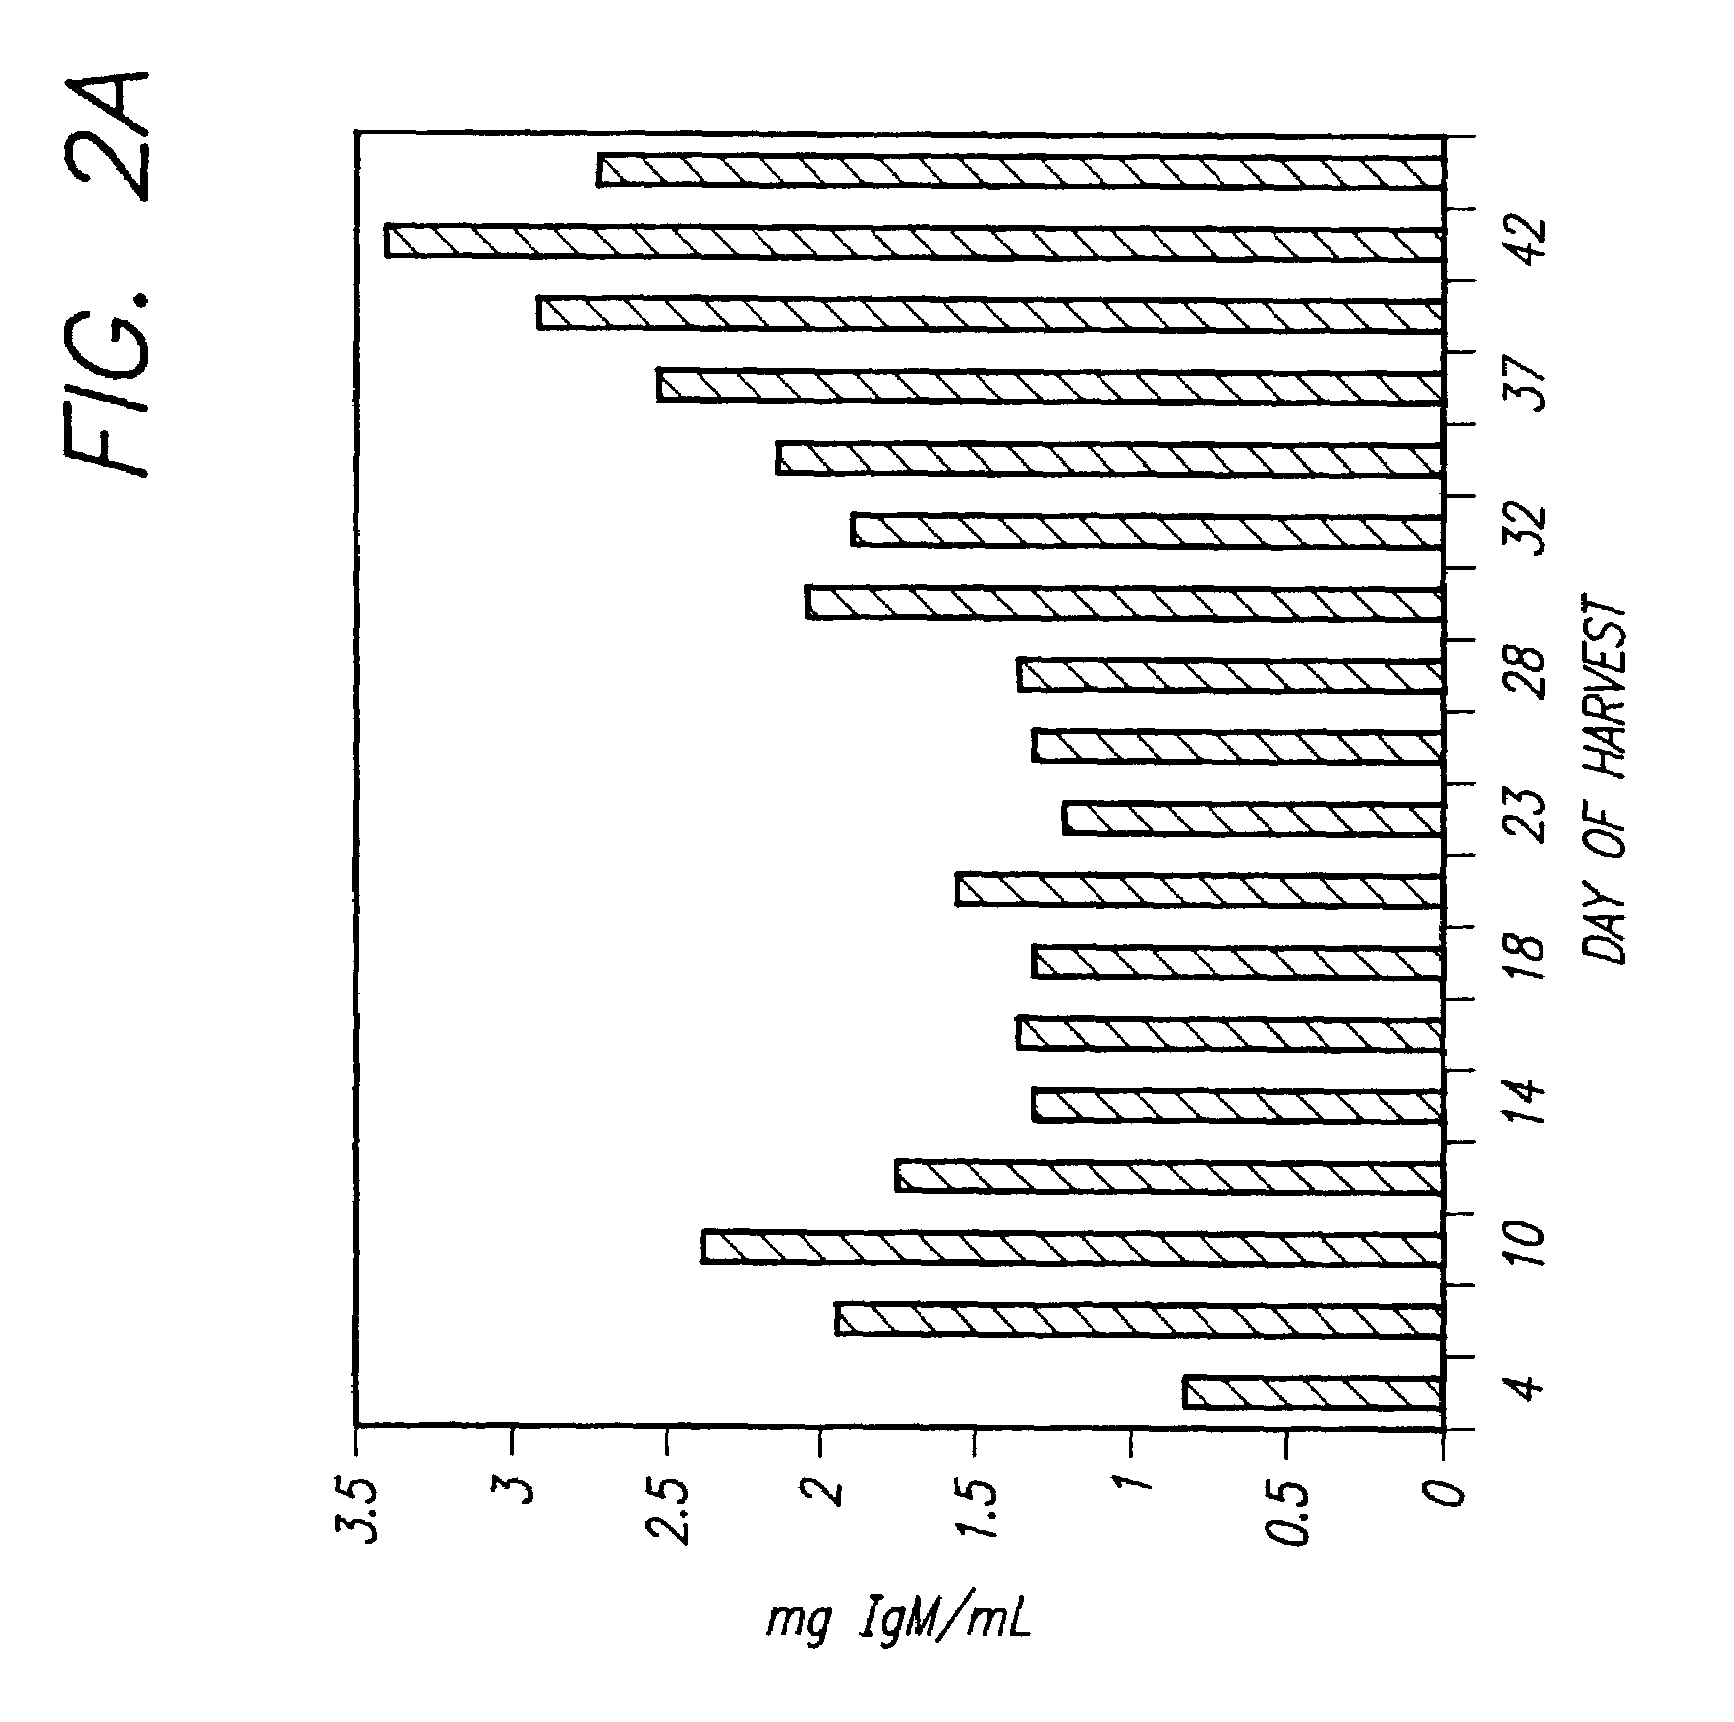 Cell culture media for enhanced protein production